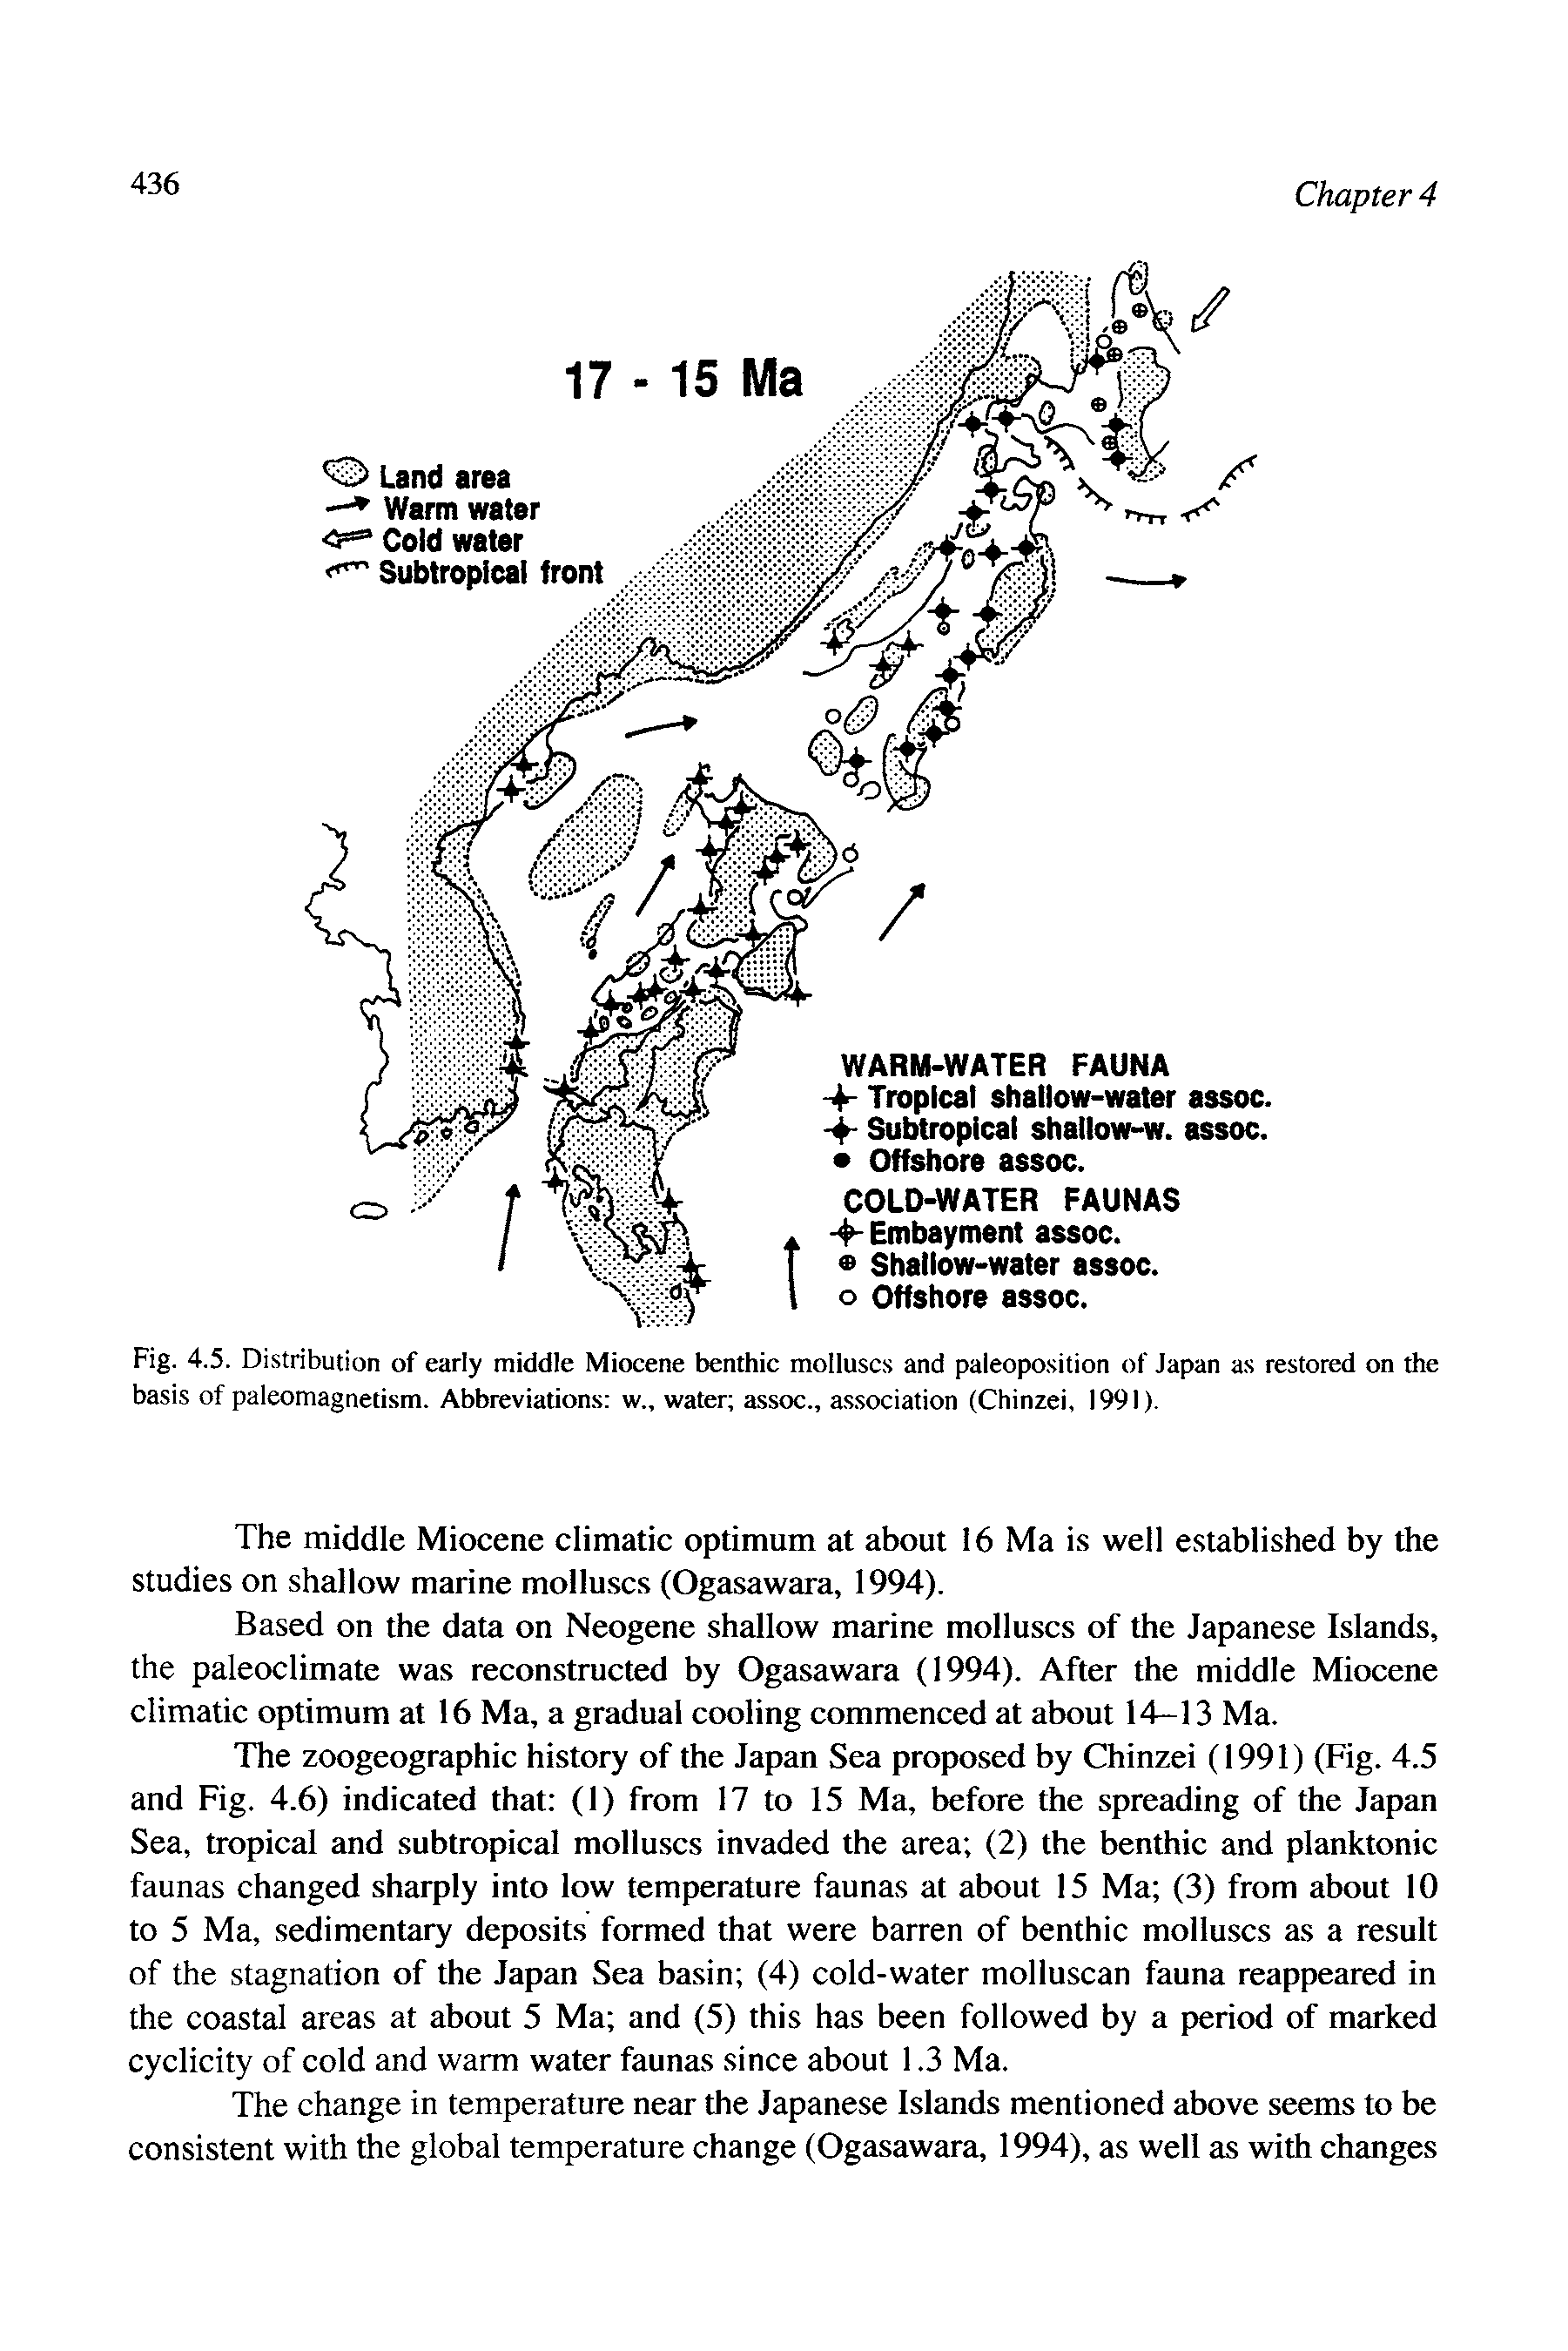 Fig. 4.5. Distribution of early middle Miocene benthic molluscs and paleoposition of Japan as restored on the basis of paleomagnetism. Abbreviations w., water assoc., association (Chinzei, 1991).